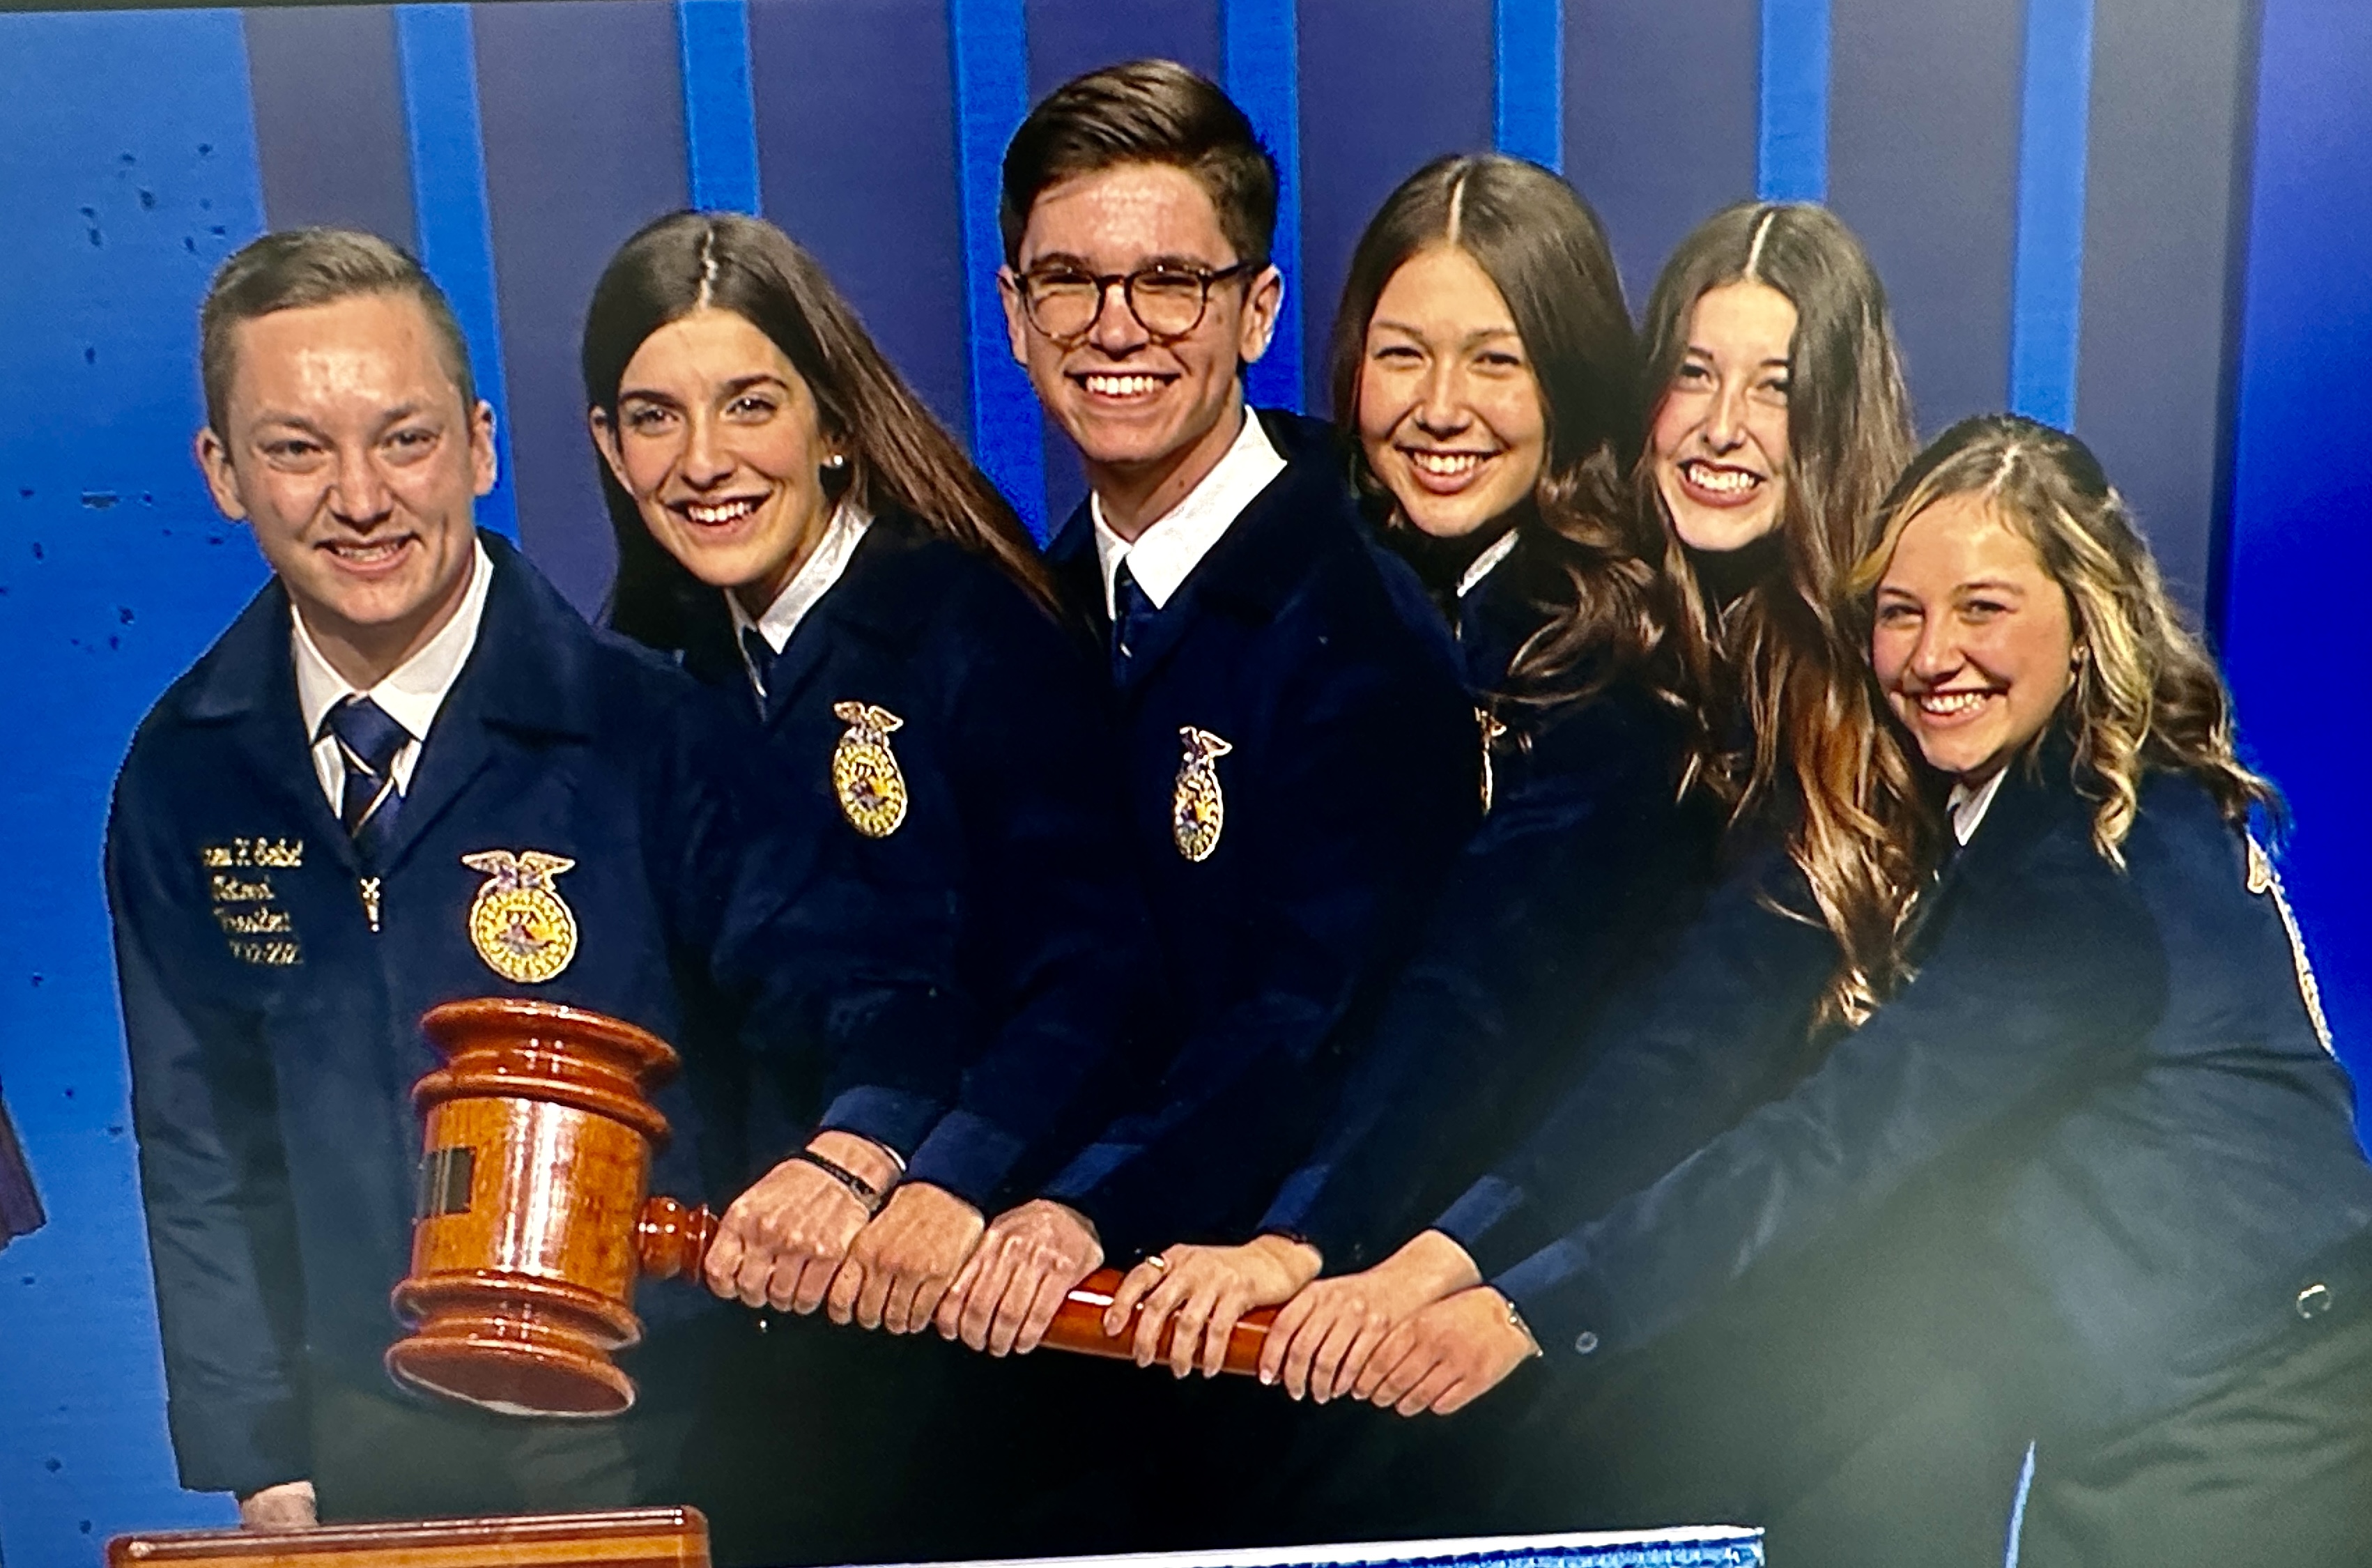 Karstyn Cantrell of Skiatook FFA Elected One of Six National Officers of the FFA for 2022-23